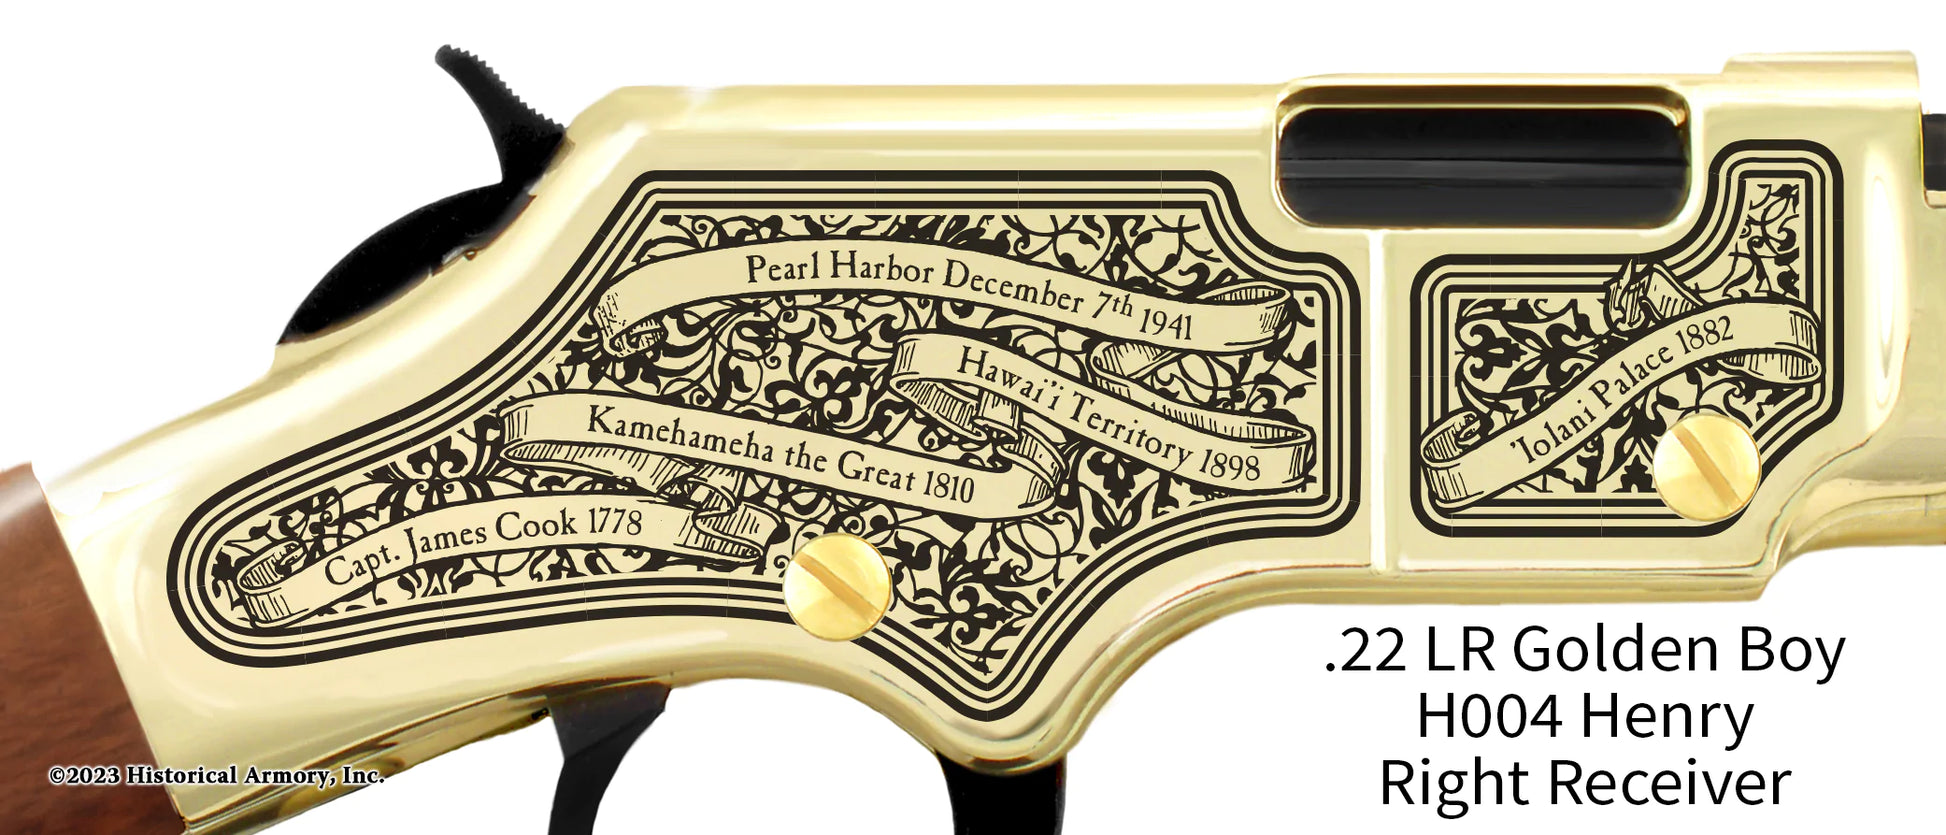 Hawaii State Pride Engraved Golden Boy Receiver detail Henry Rifle